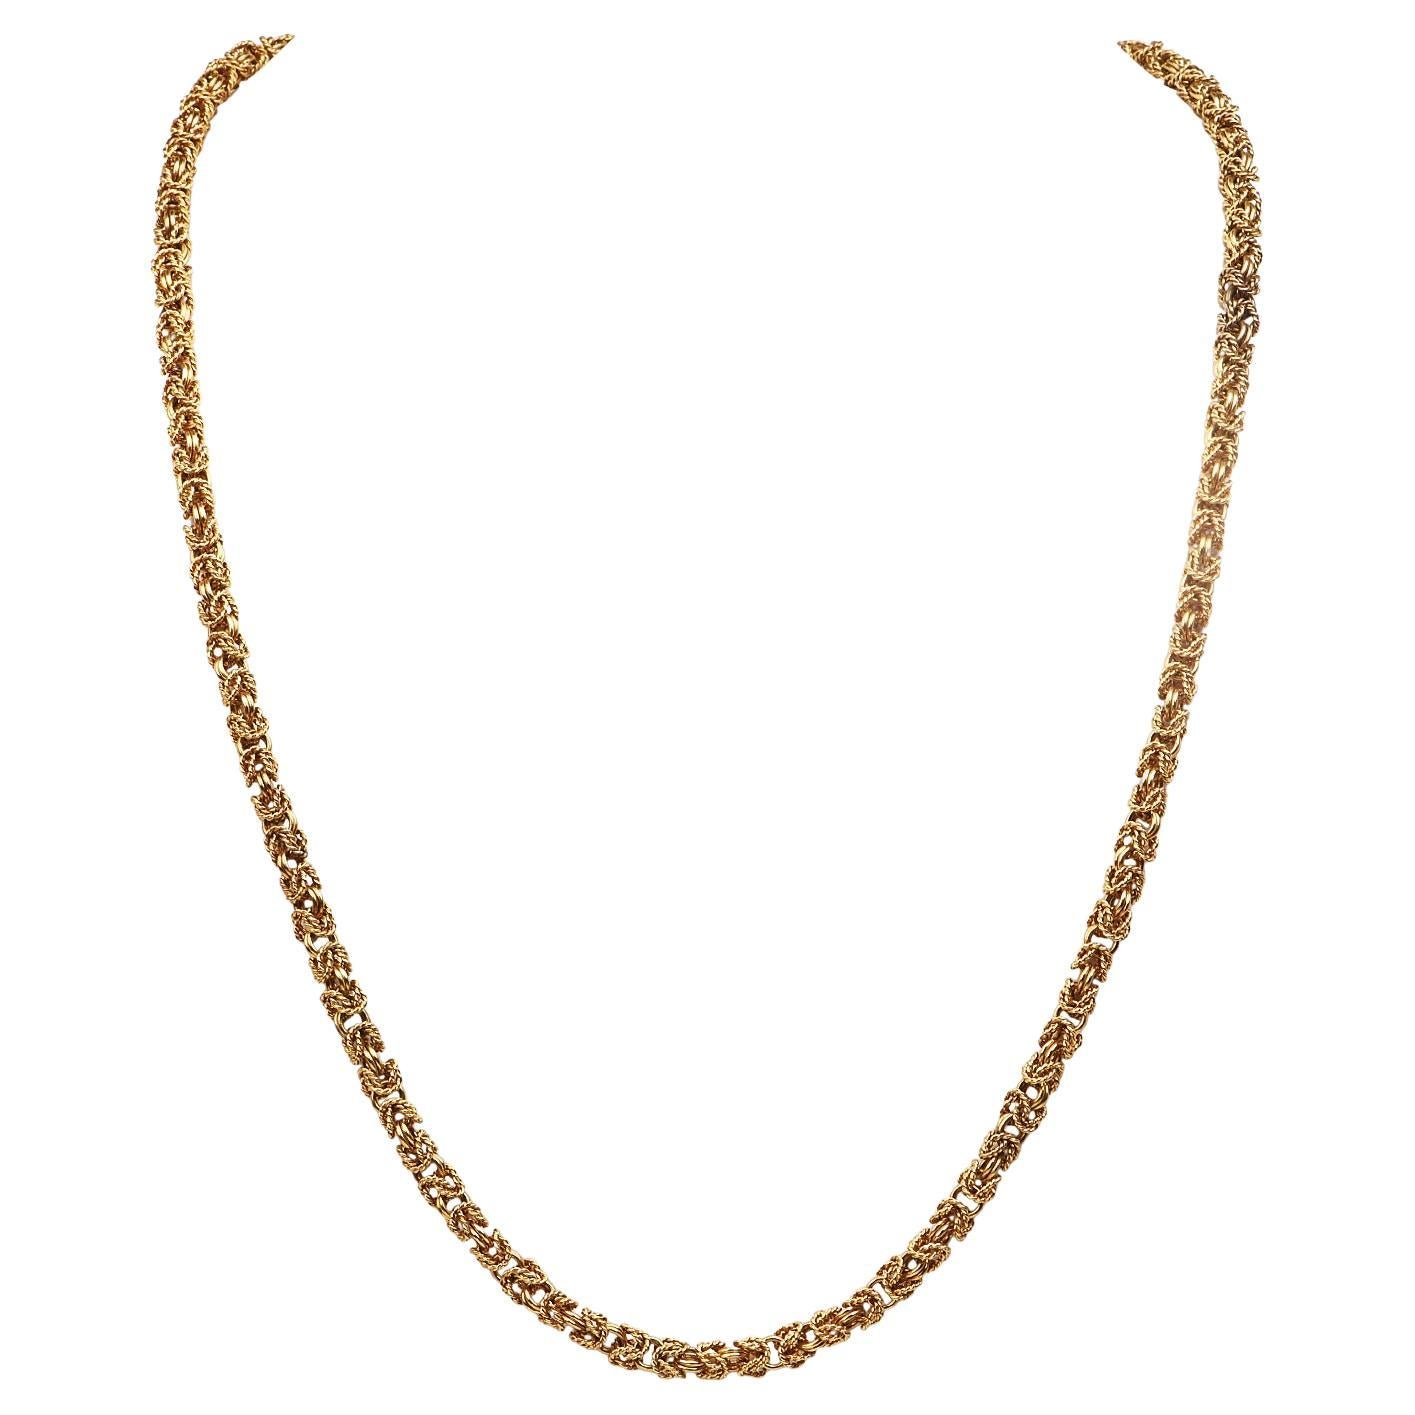 Vintage Retro 18K Yellow Gold Byzantine Link Chain Necklace